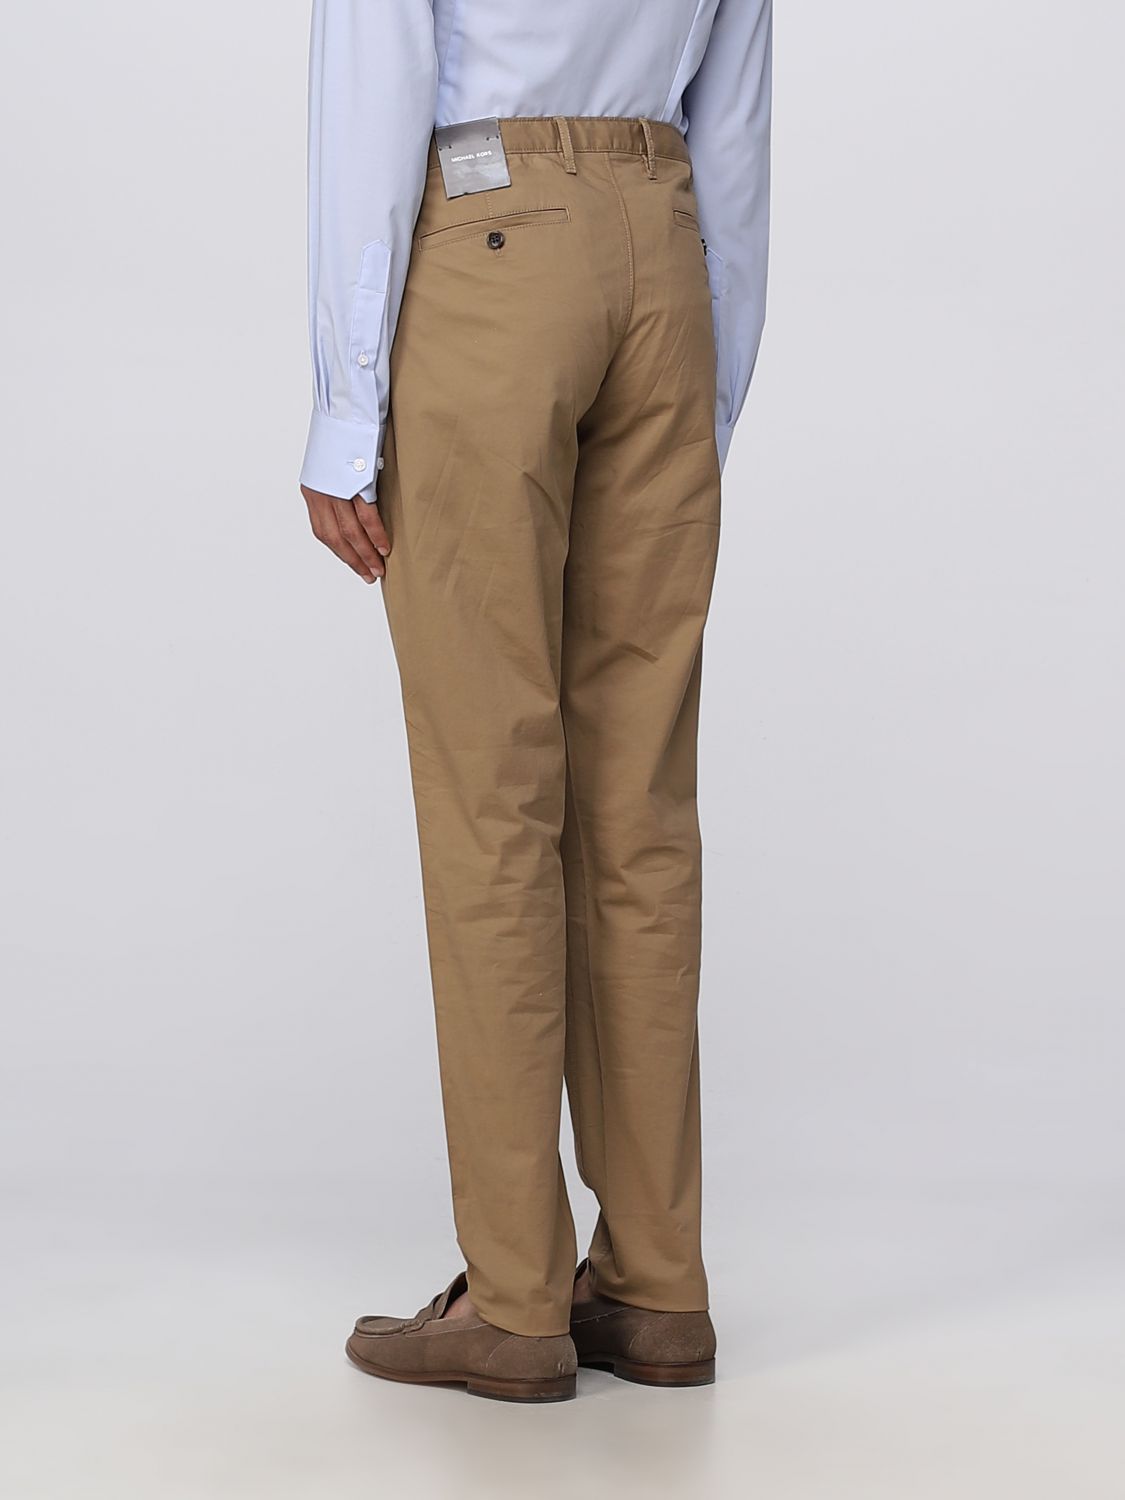 Michael Kors Pants Slacks and Chinos for Men  Online Sale up to 70 off   Lyst Canada